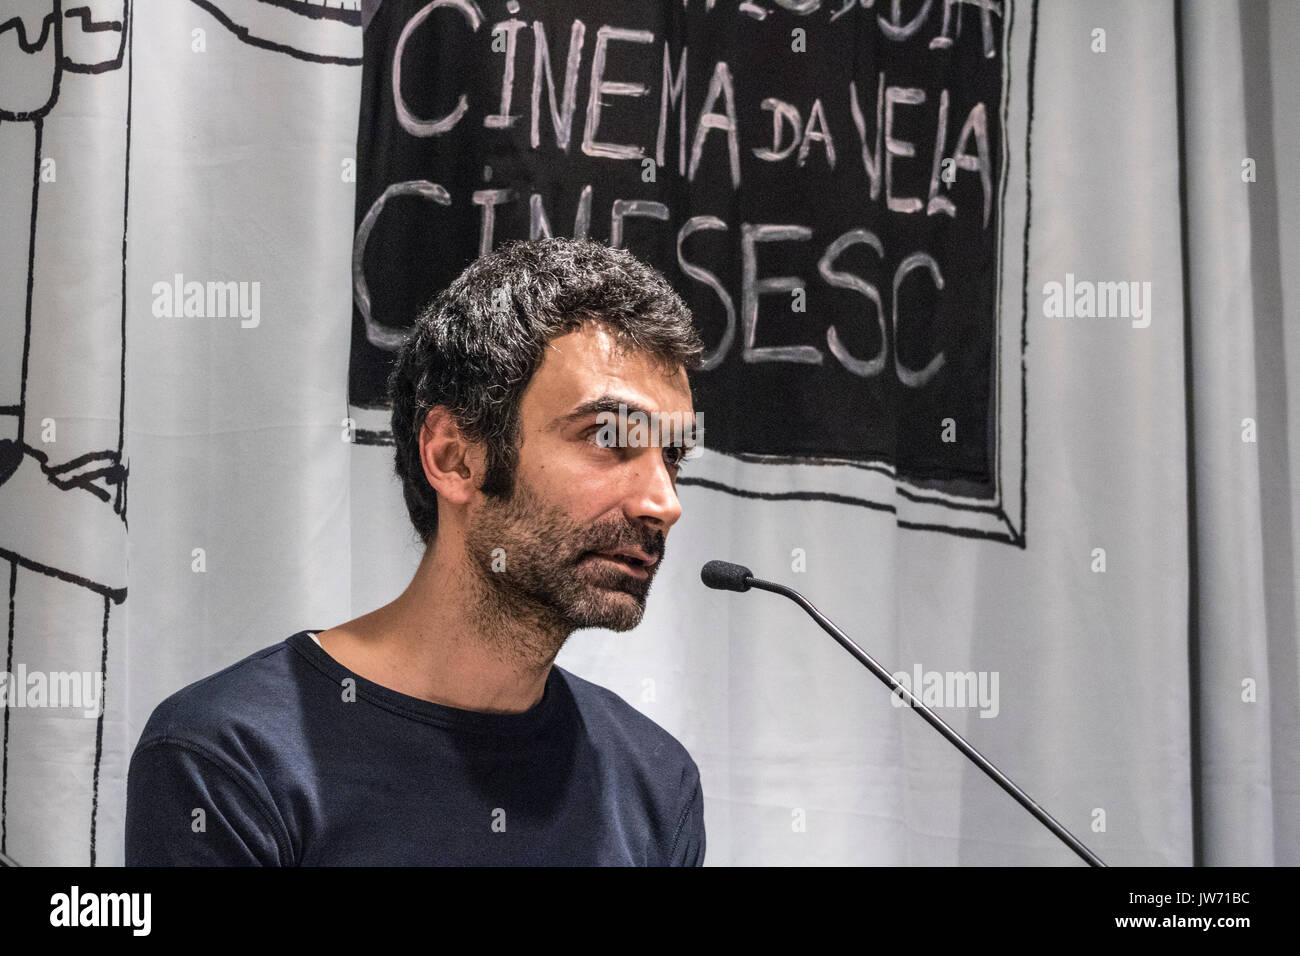 São Paulo, SP, Brazil, 08/10/2017. Lebanese filmmaker and actor Rami Nihawi talks about his work during the event called “Cinema of the Candle”, which is part of the program of the Arab World Film Festival, in Cinesesc, central region of Sao Paulo, Brazil Stock Photo